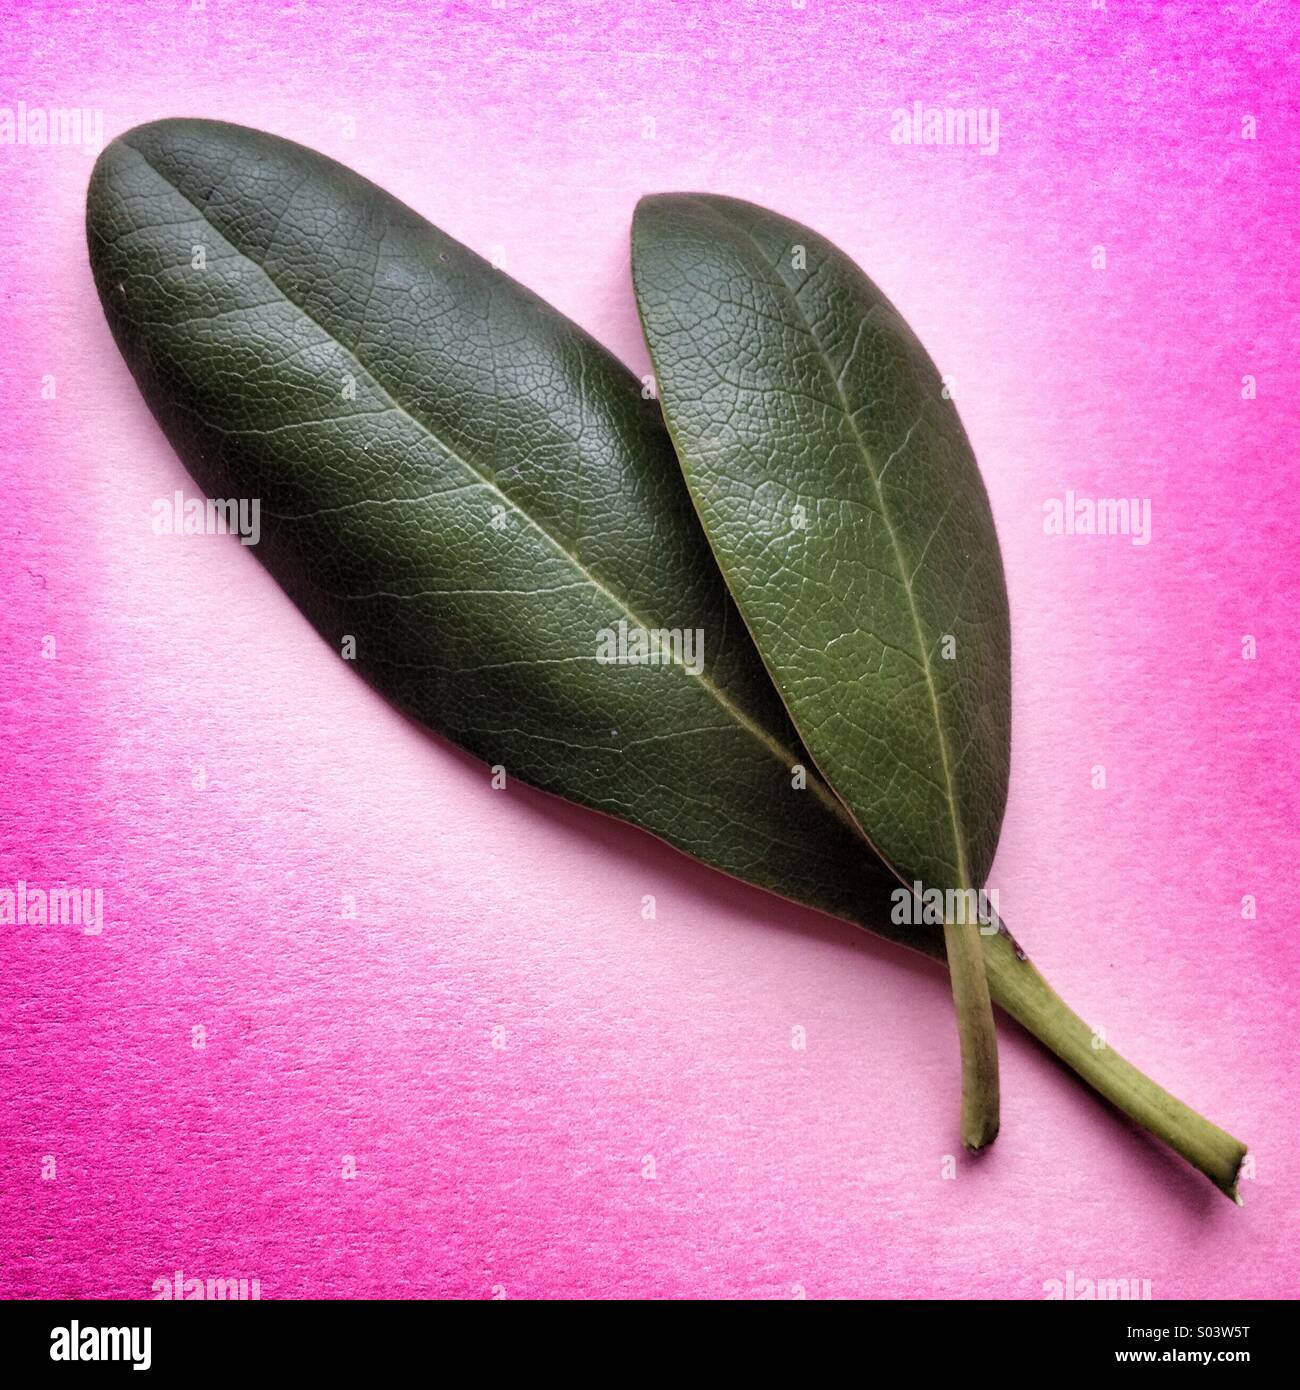 Rhododendron leaves Stock Photo